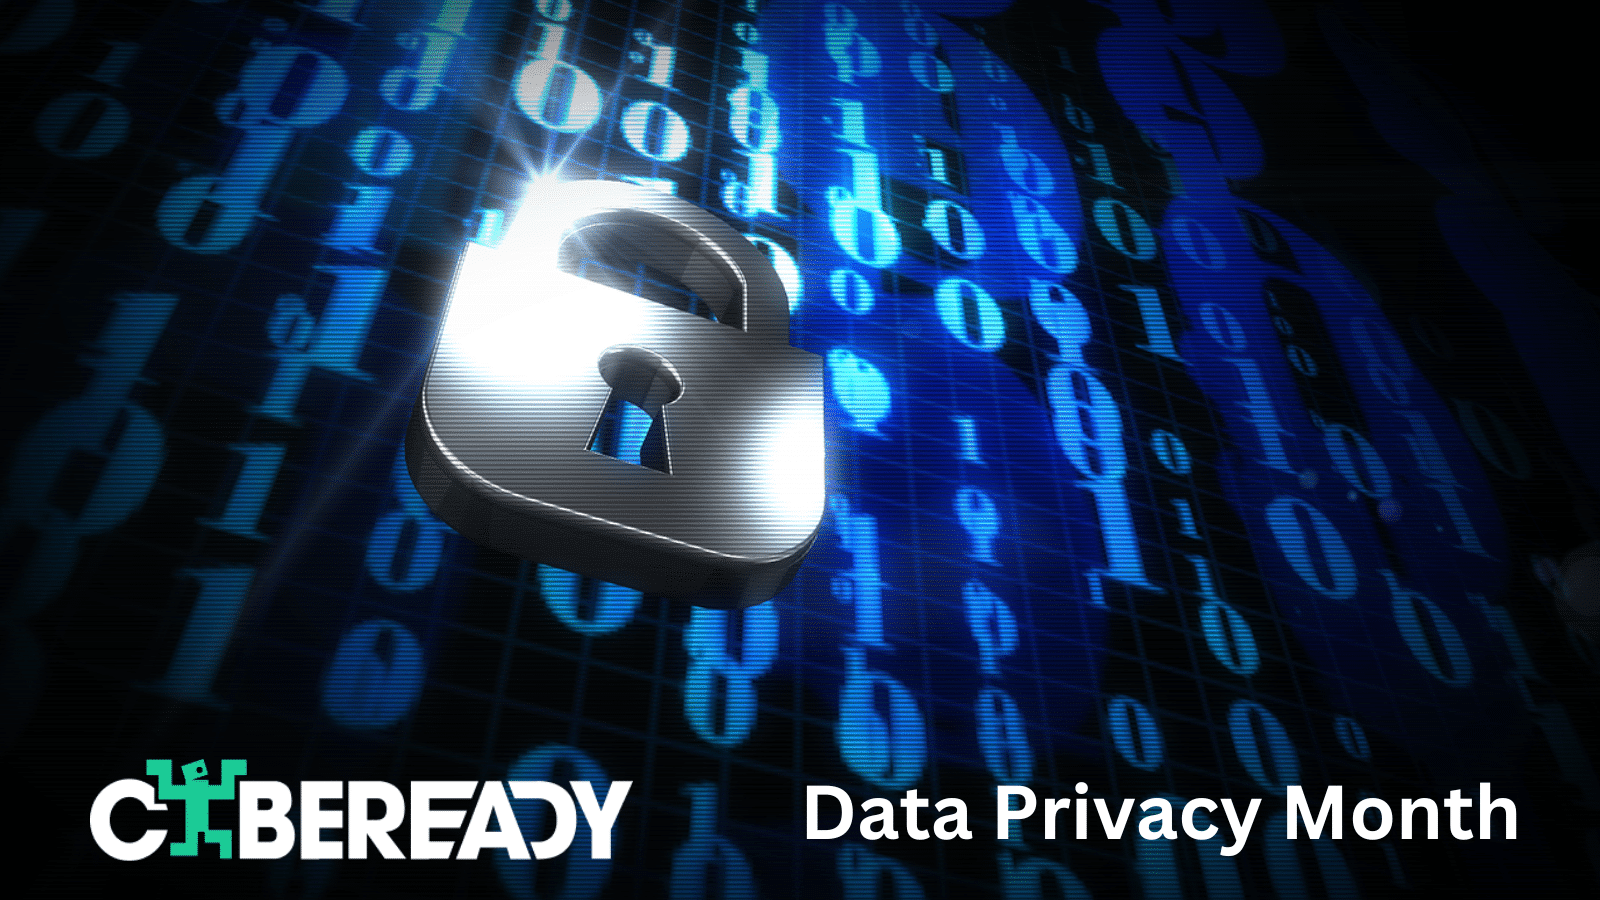 Data privacy Month